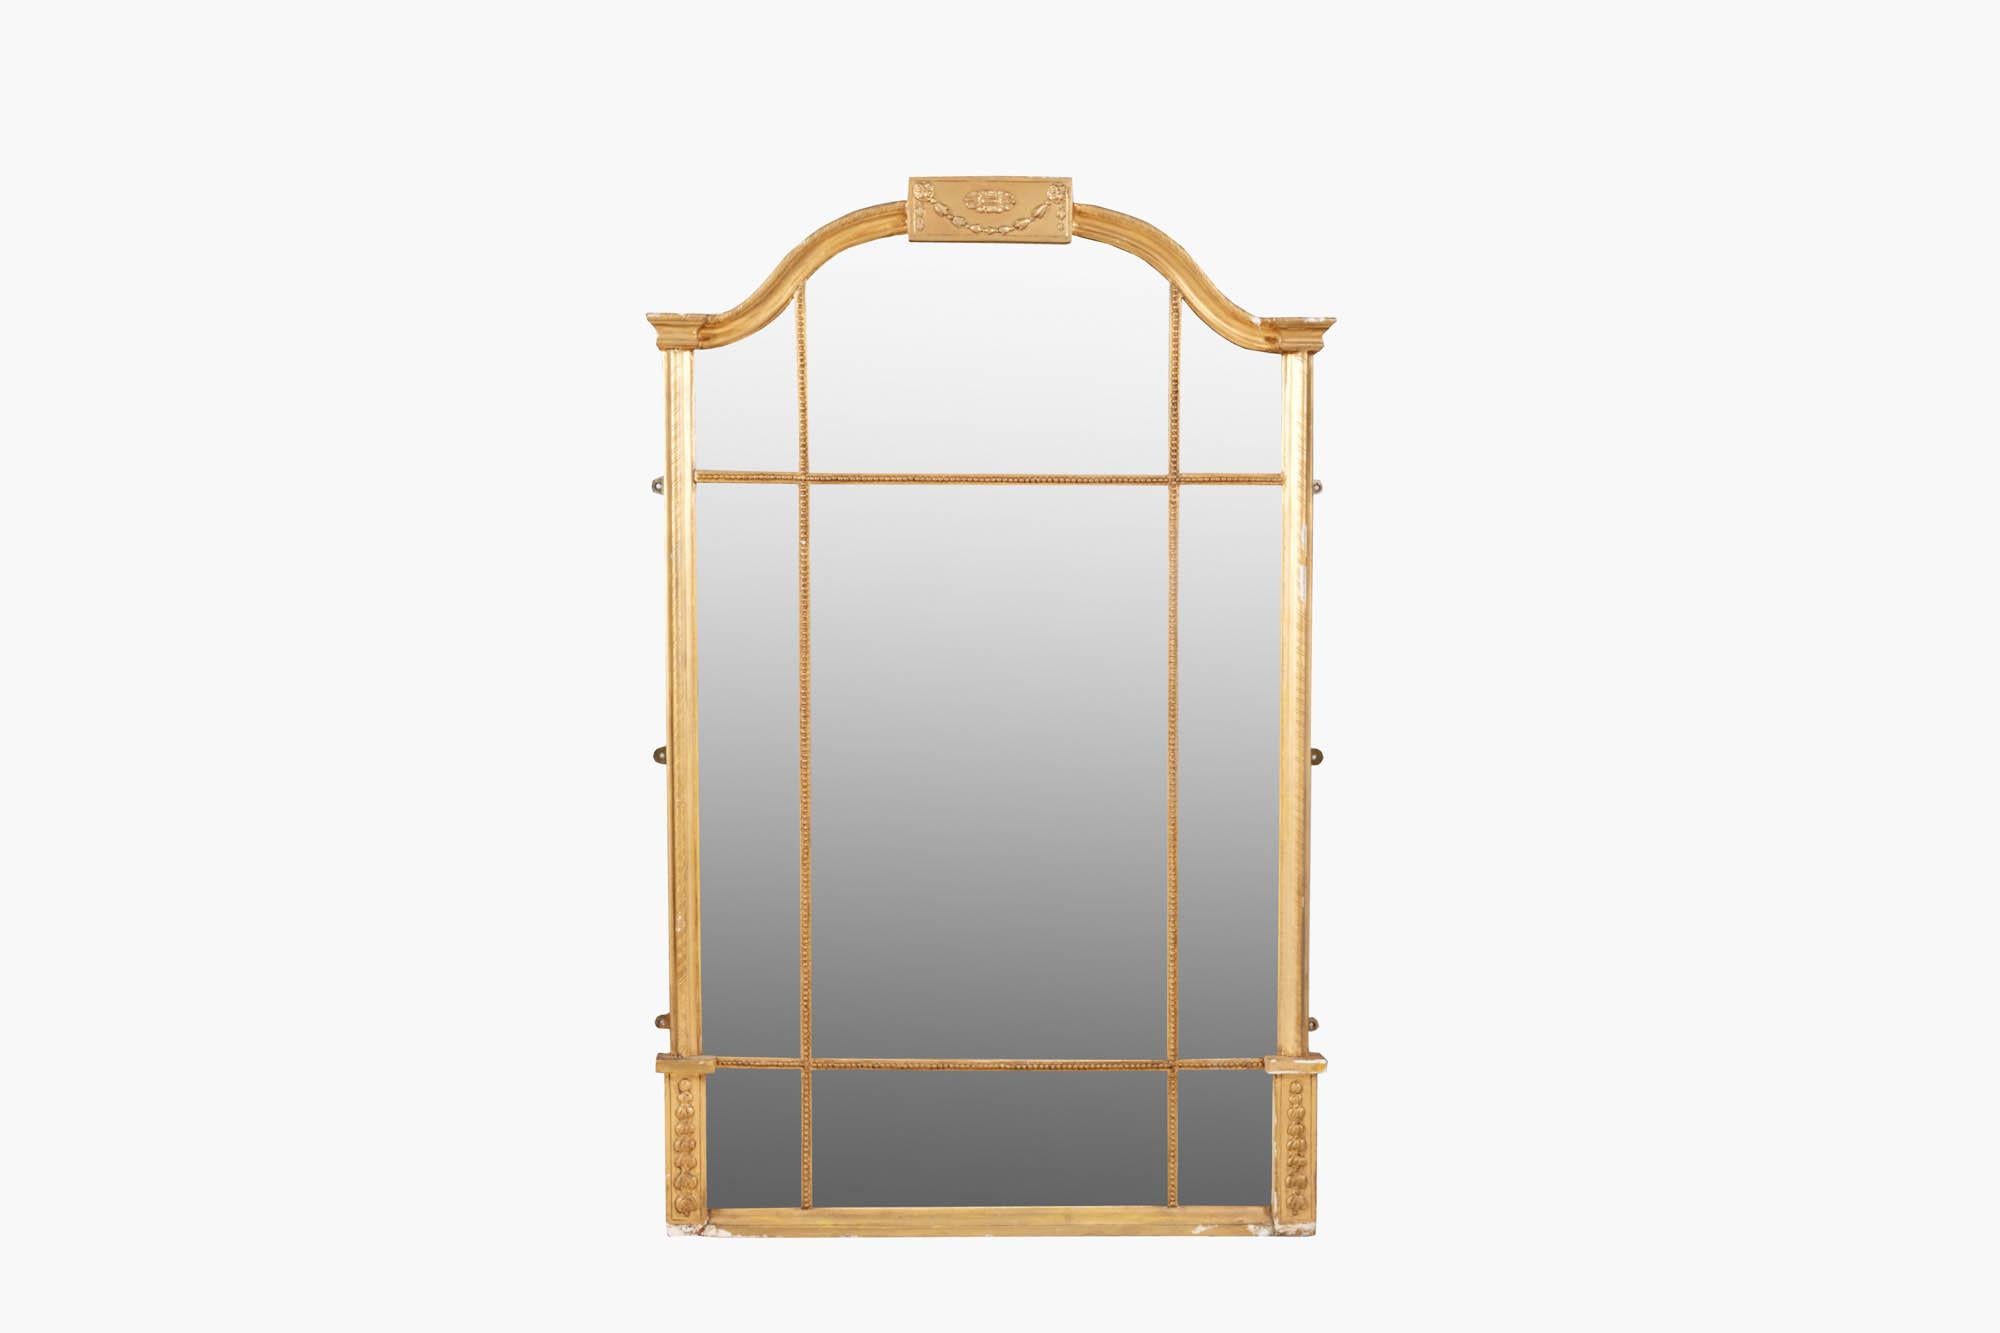 19th Century arch-top pier mirror in the style of Adams, with delicate cock-beaded moldings separating nine mirror panels. The giltwood frame has a carved central crest with floral swag ornamentation. The pillared sides terminate in ornamental